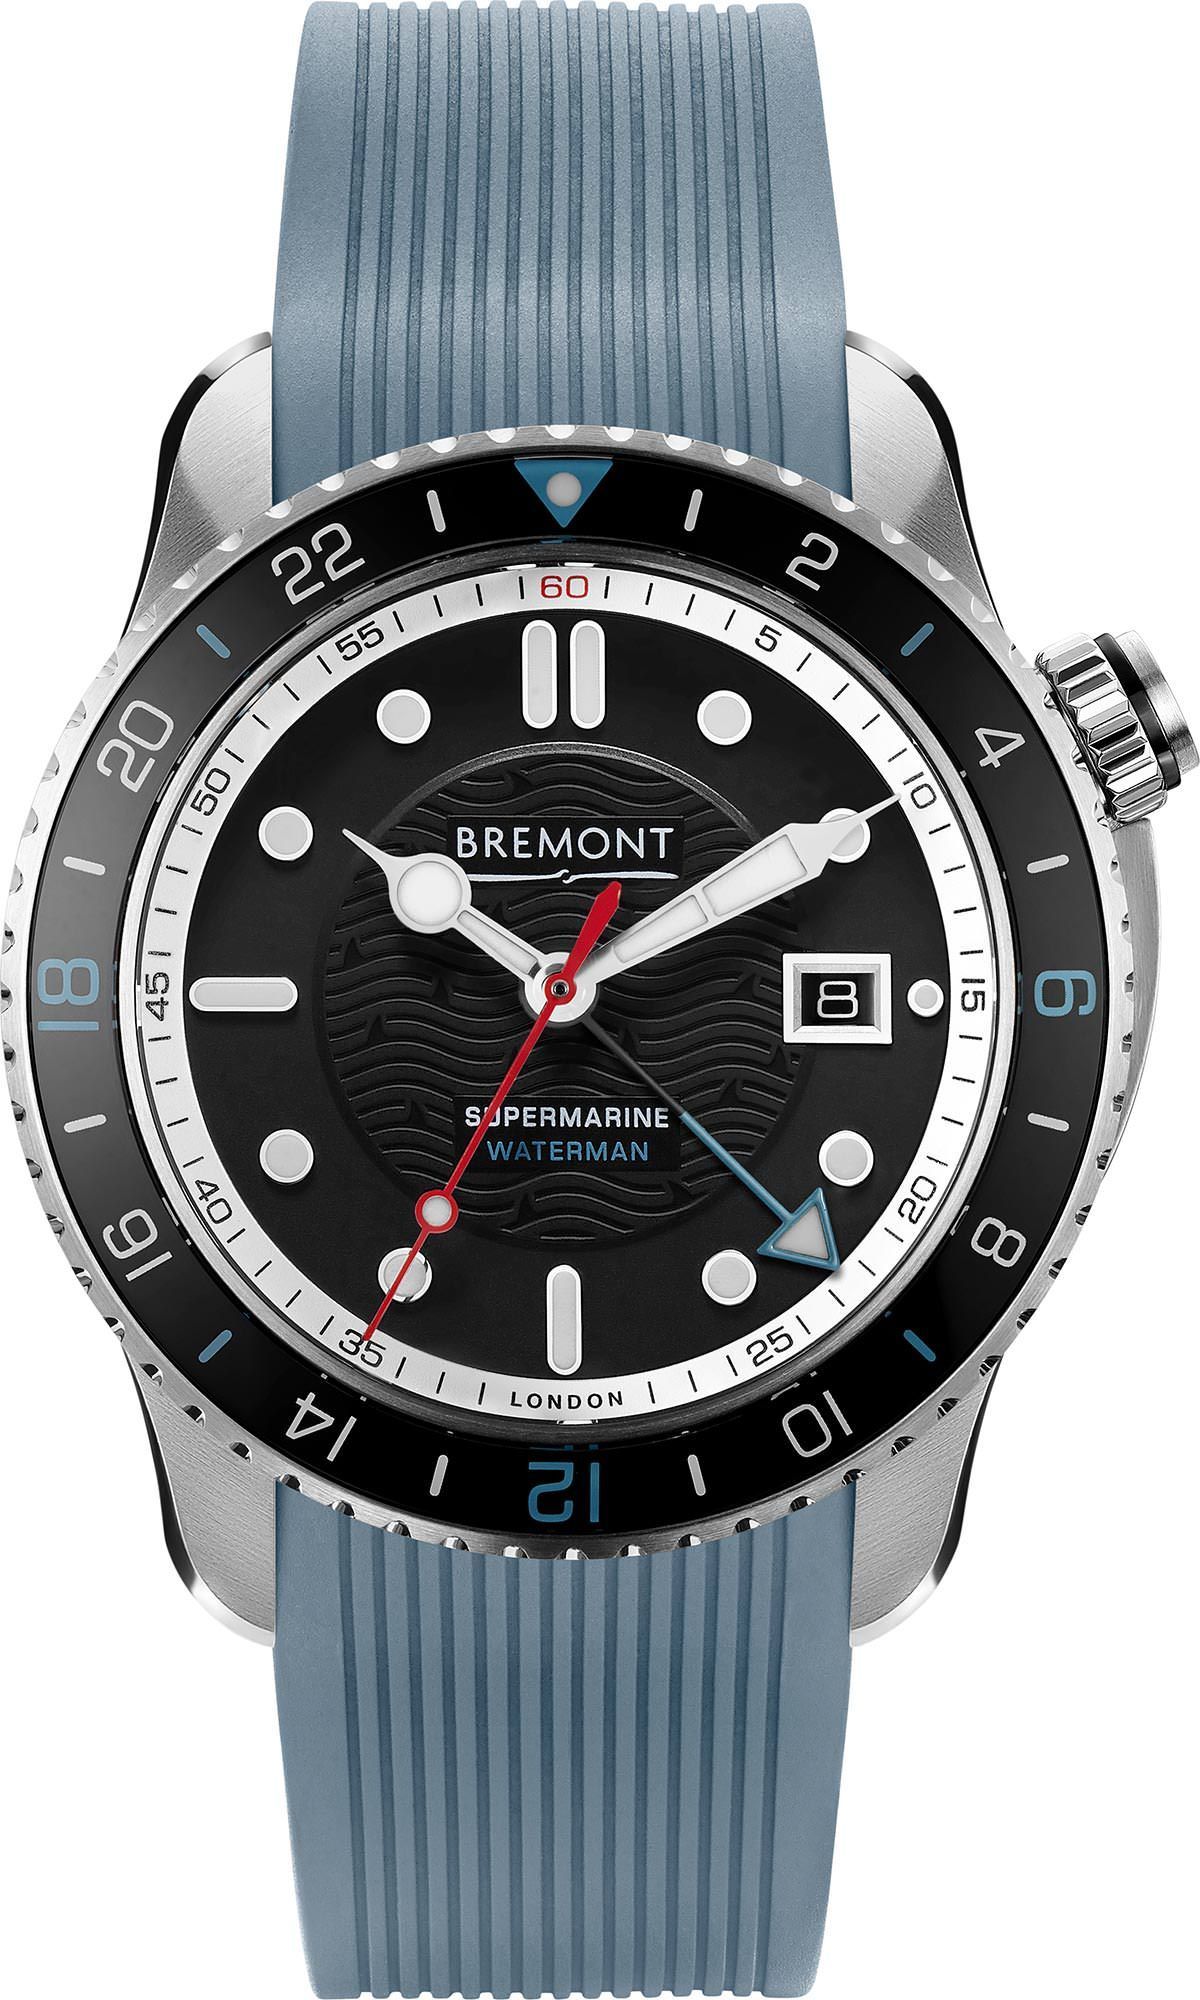 Bremont Supermarine Waterman Apex Black Dial 43 mm Automatic Watch For Men - 1